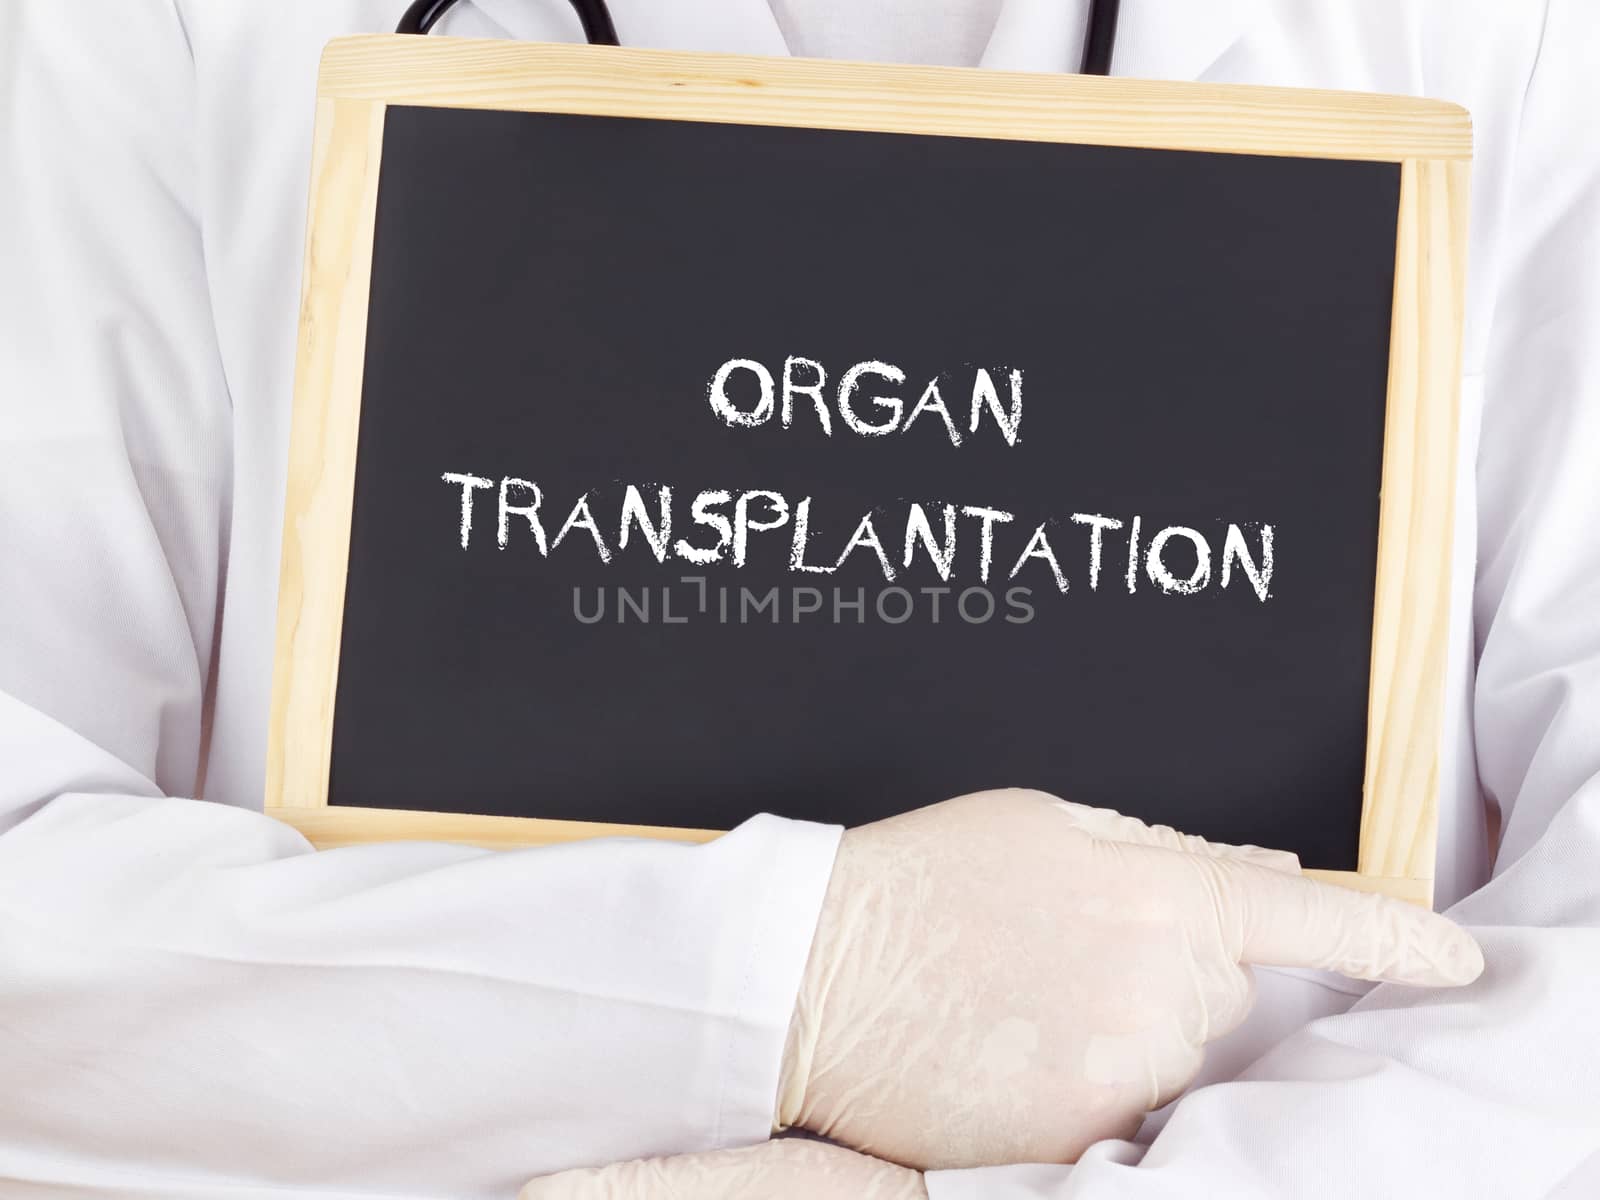 Doctor shows information: organ transplantation by gwolters